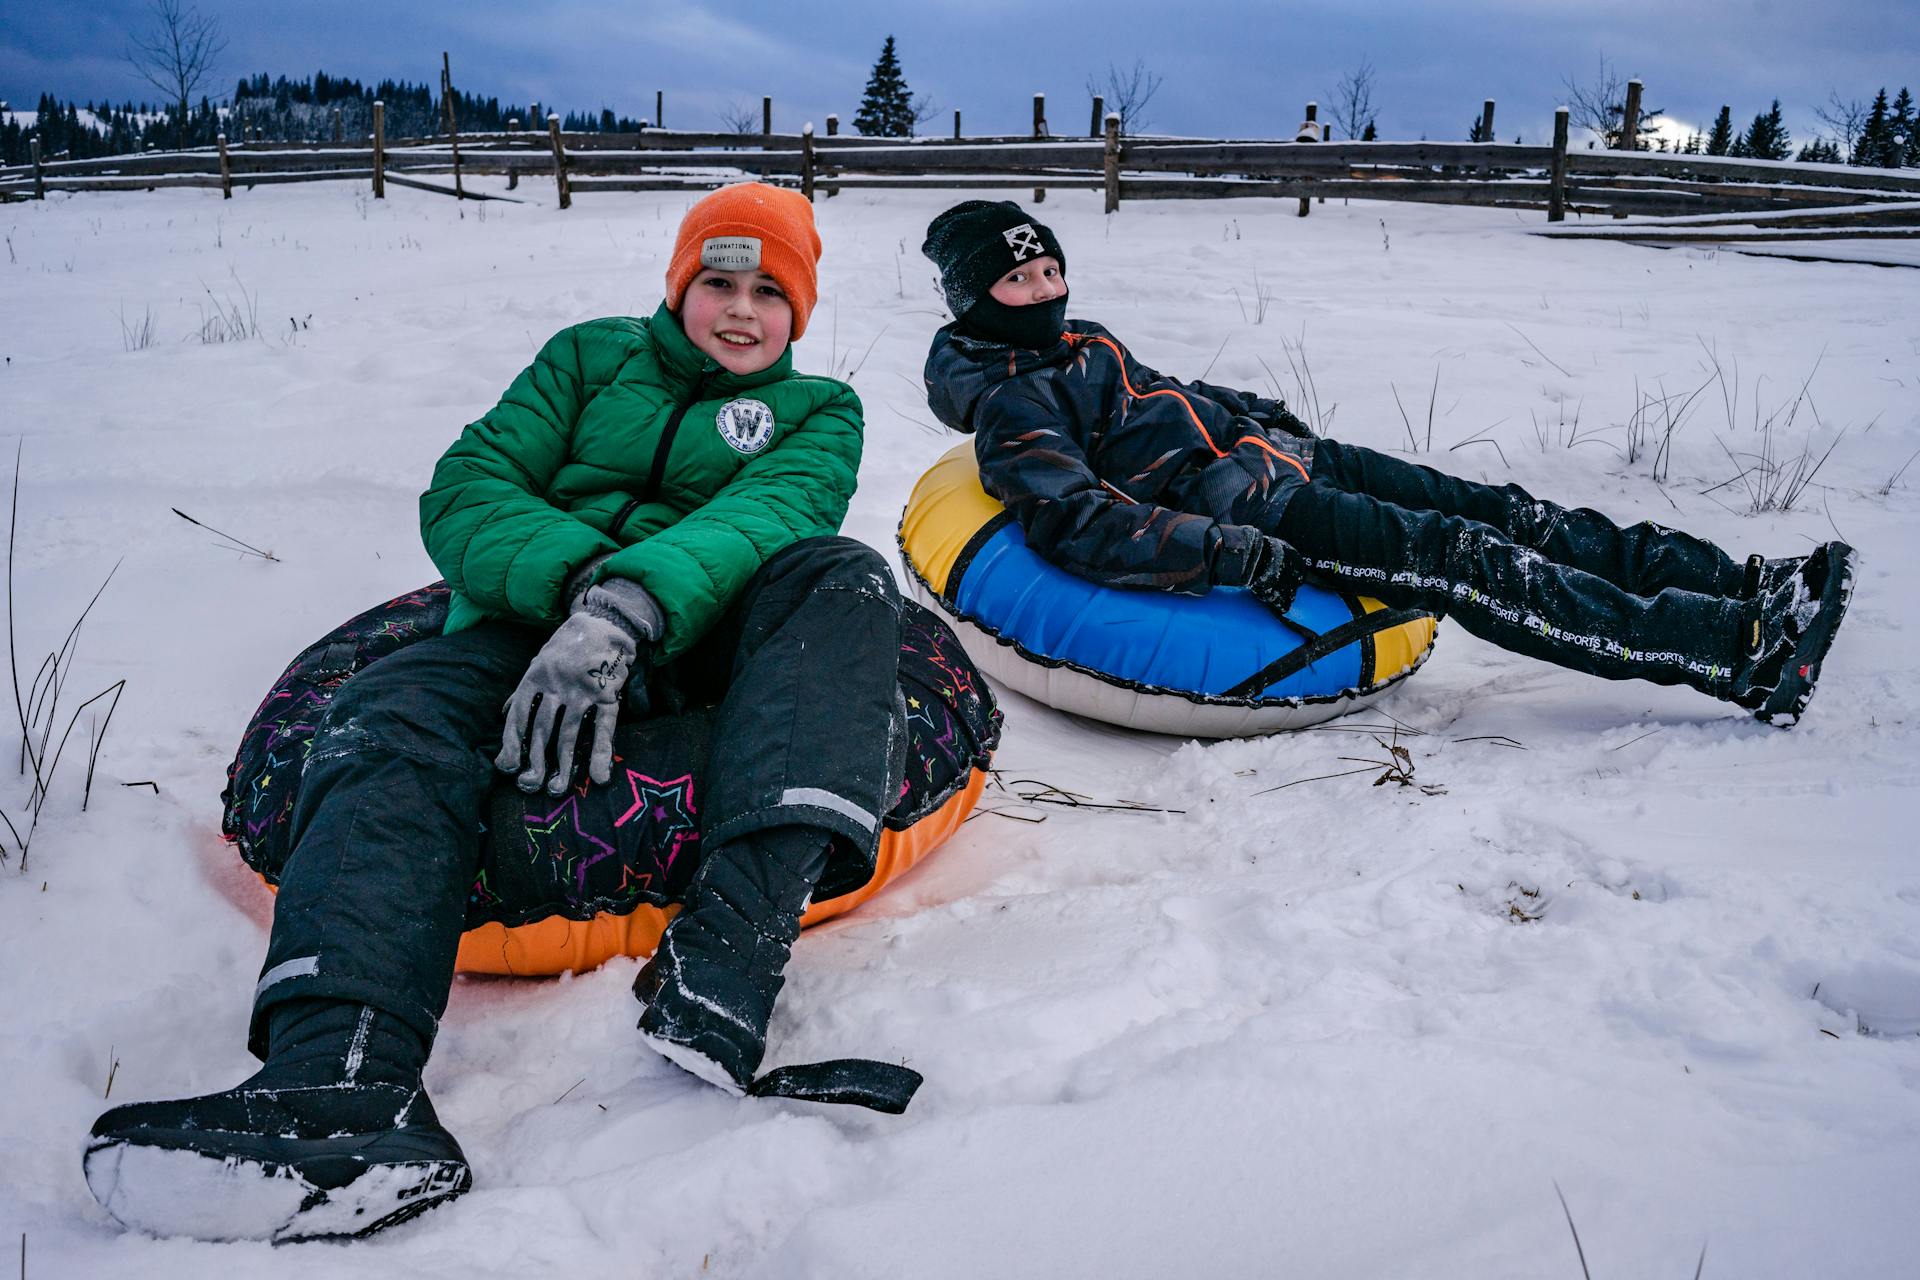 Two boys sitting on snow tubes, one of the best winter activities in Utah